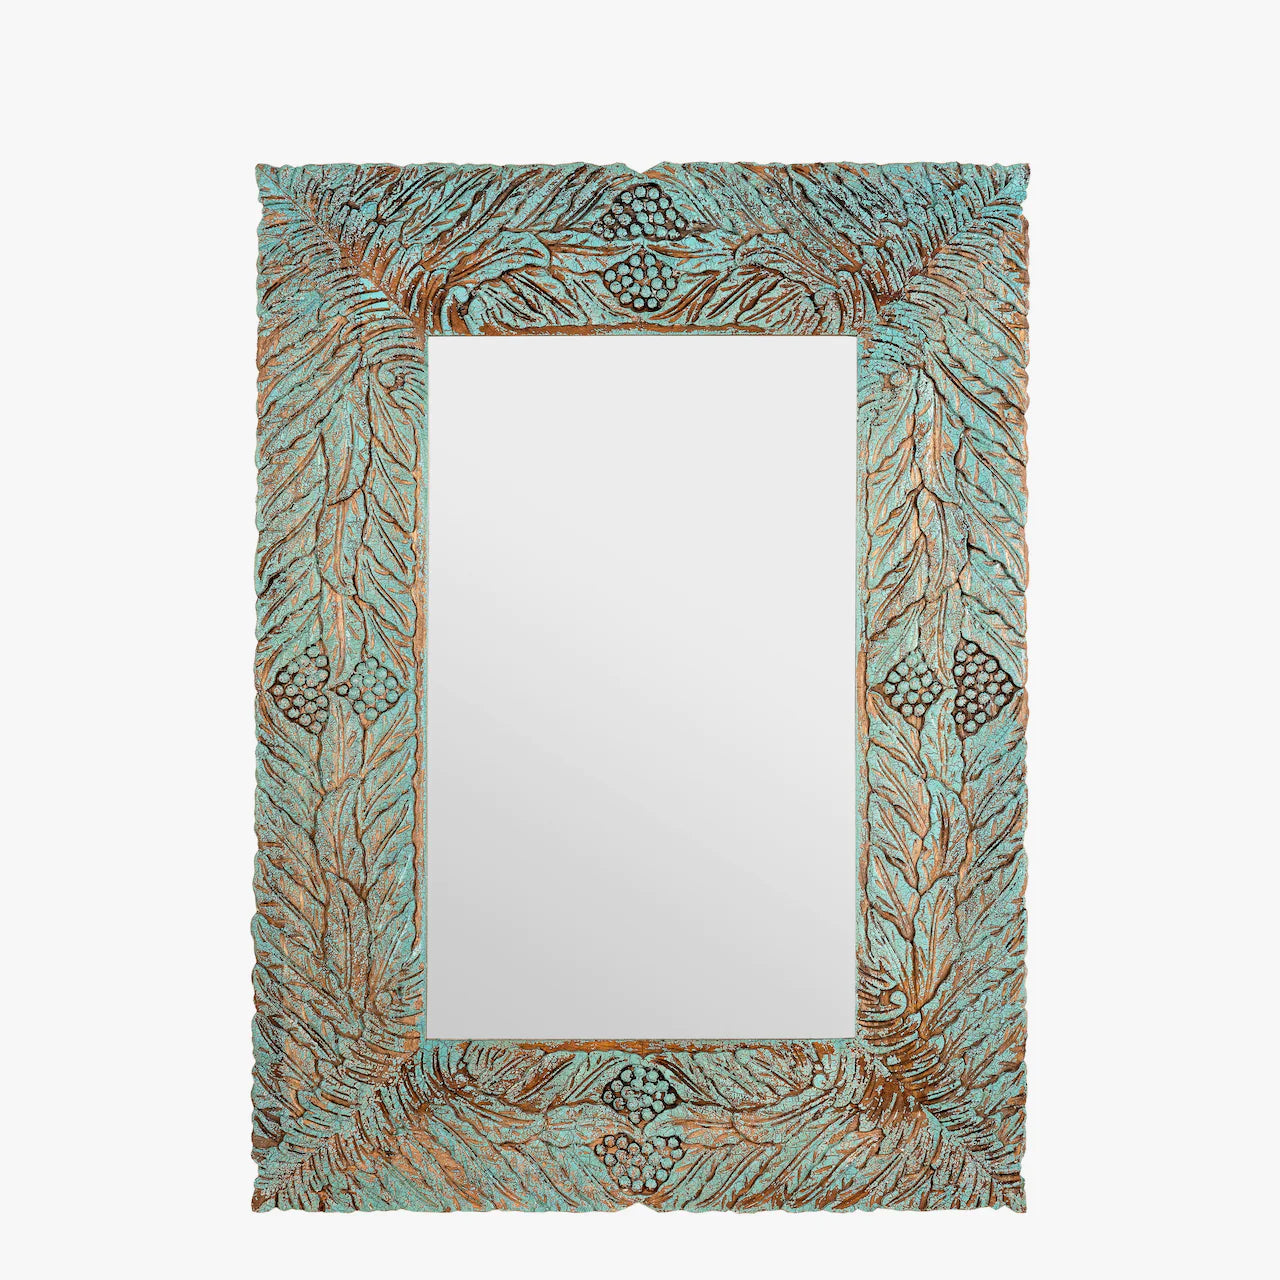 Bohemian Peacock Carved Wall Mirror